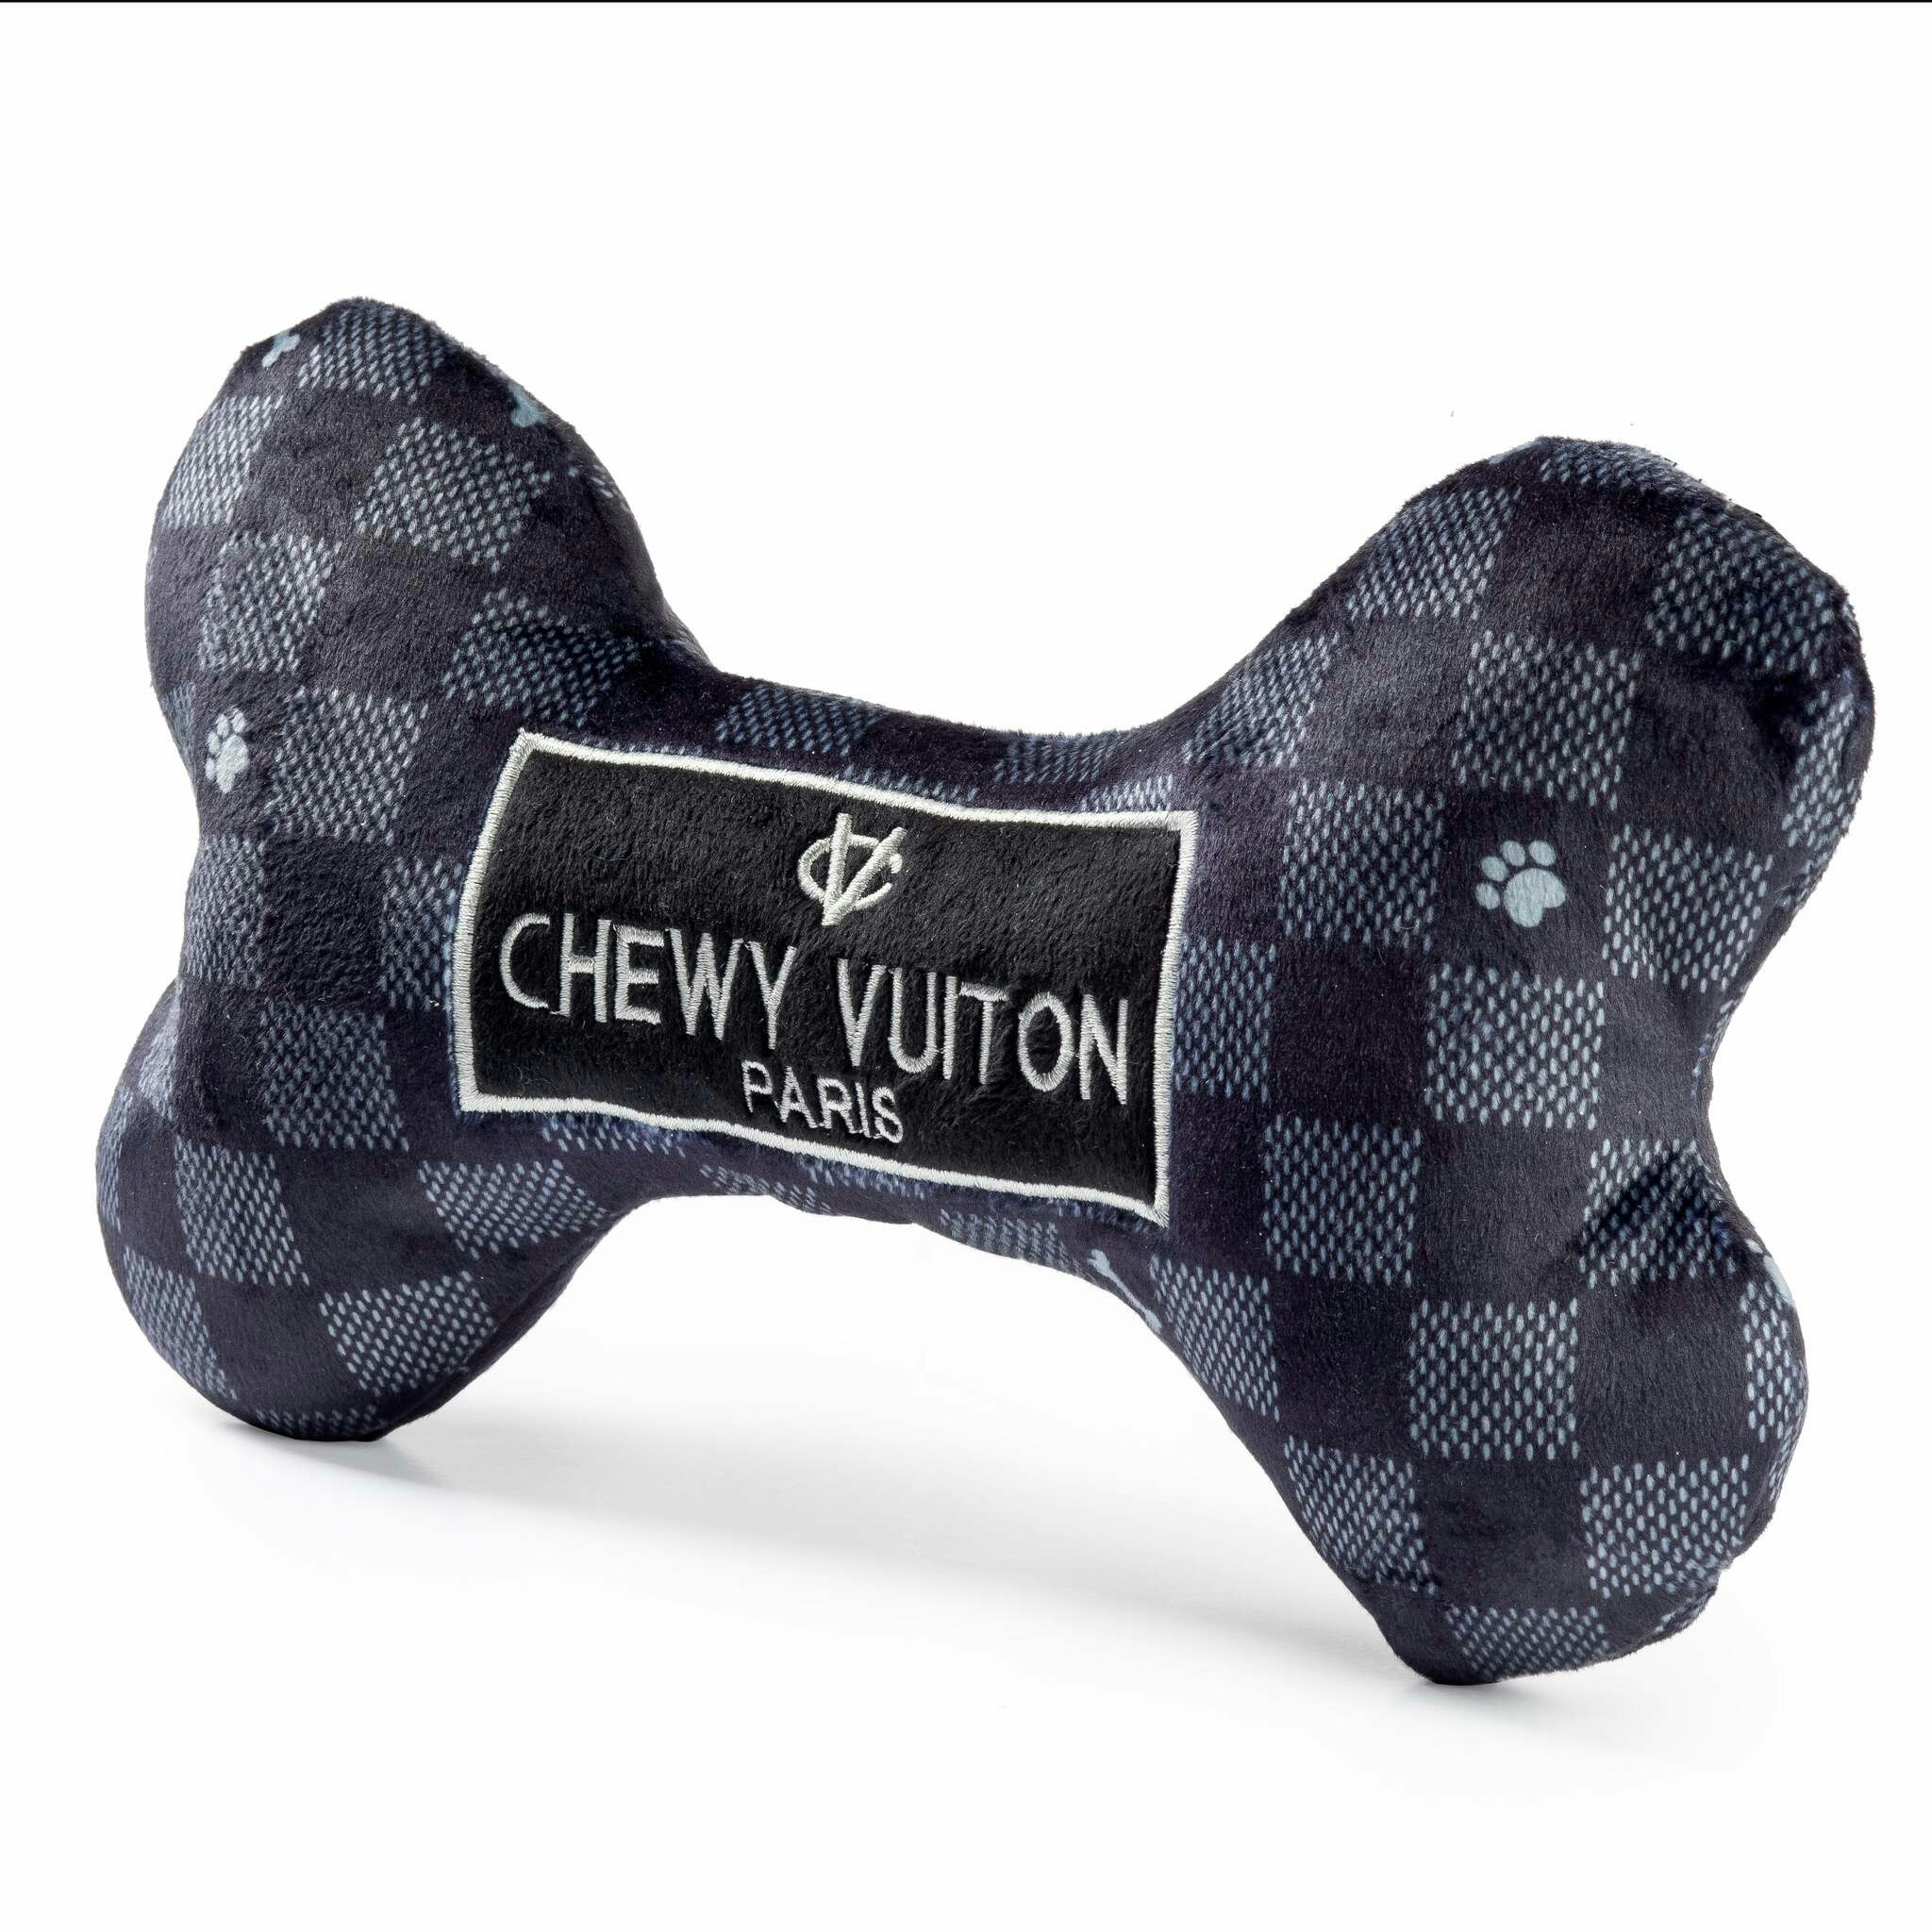 Chewy Vuiton Bone Dog Toy - Puppy Kisses